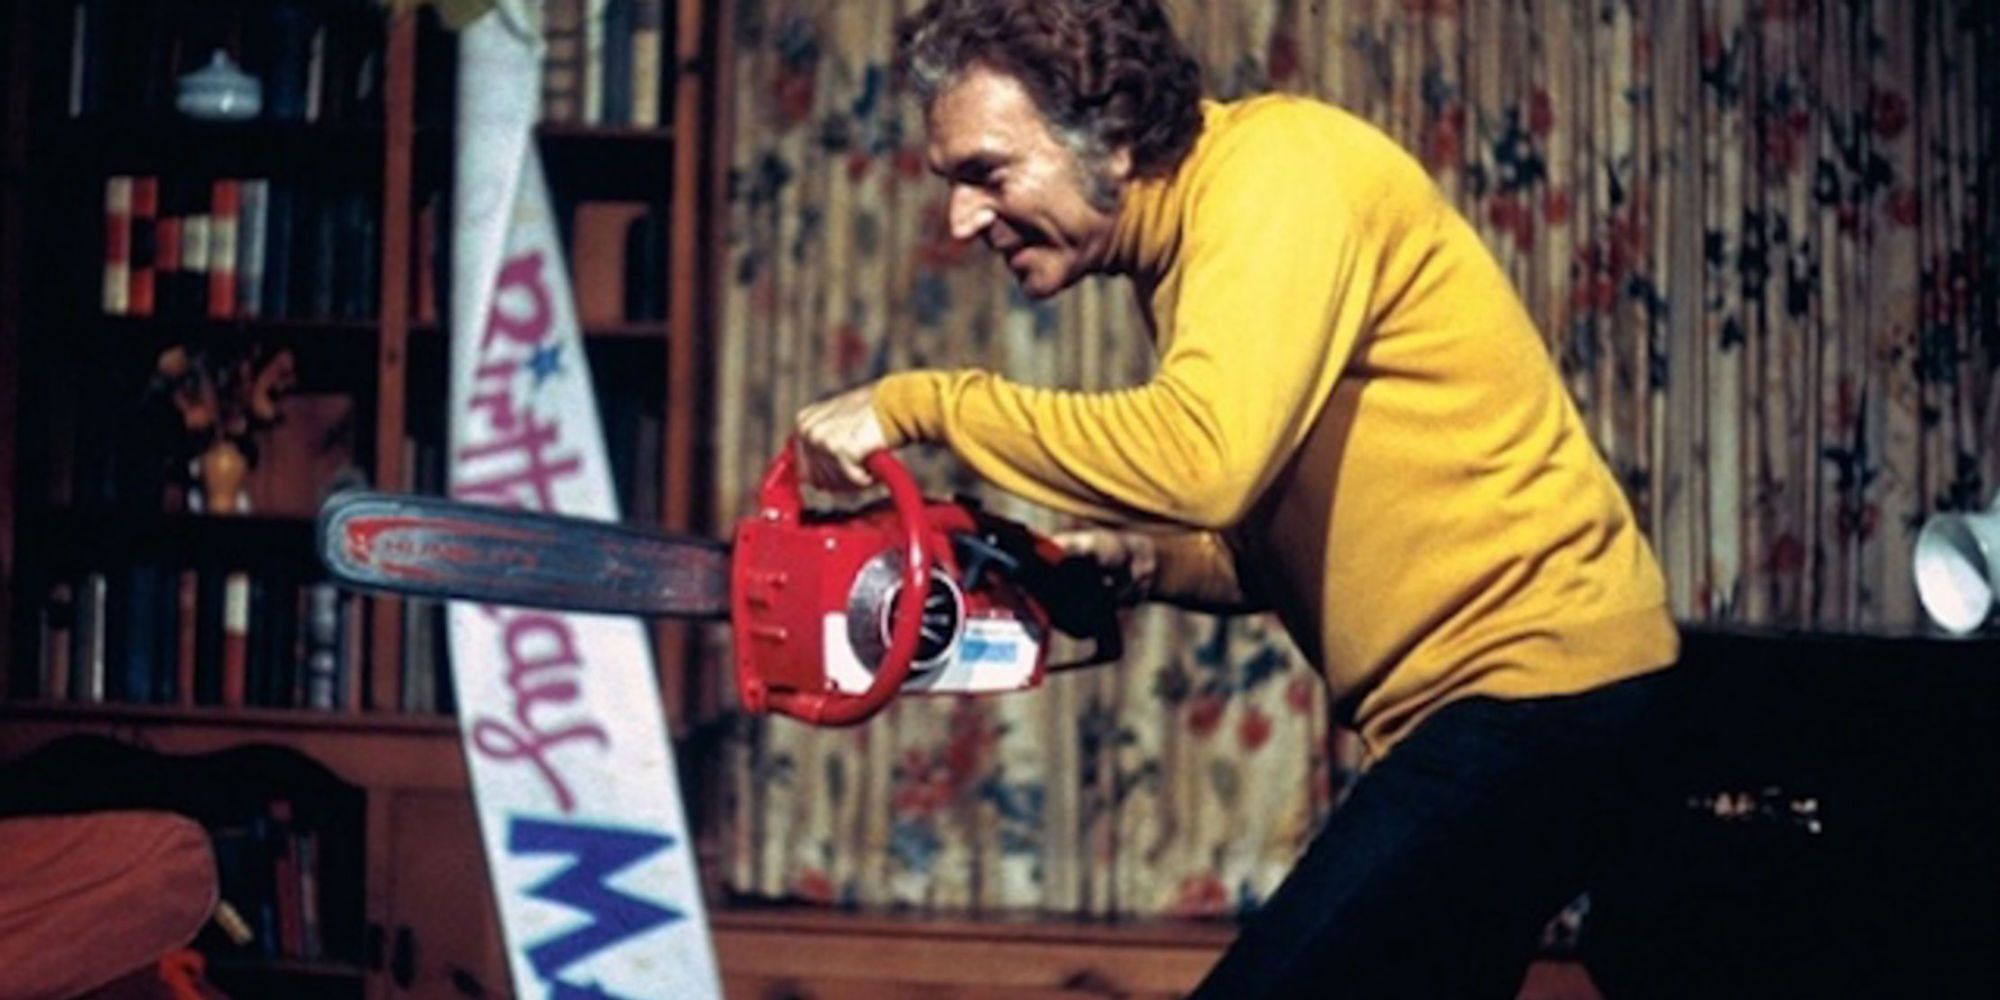 A man wields a chainsaw in The Last House on The Left.